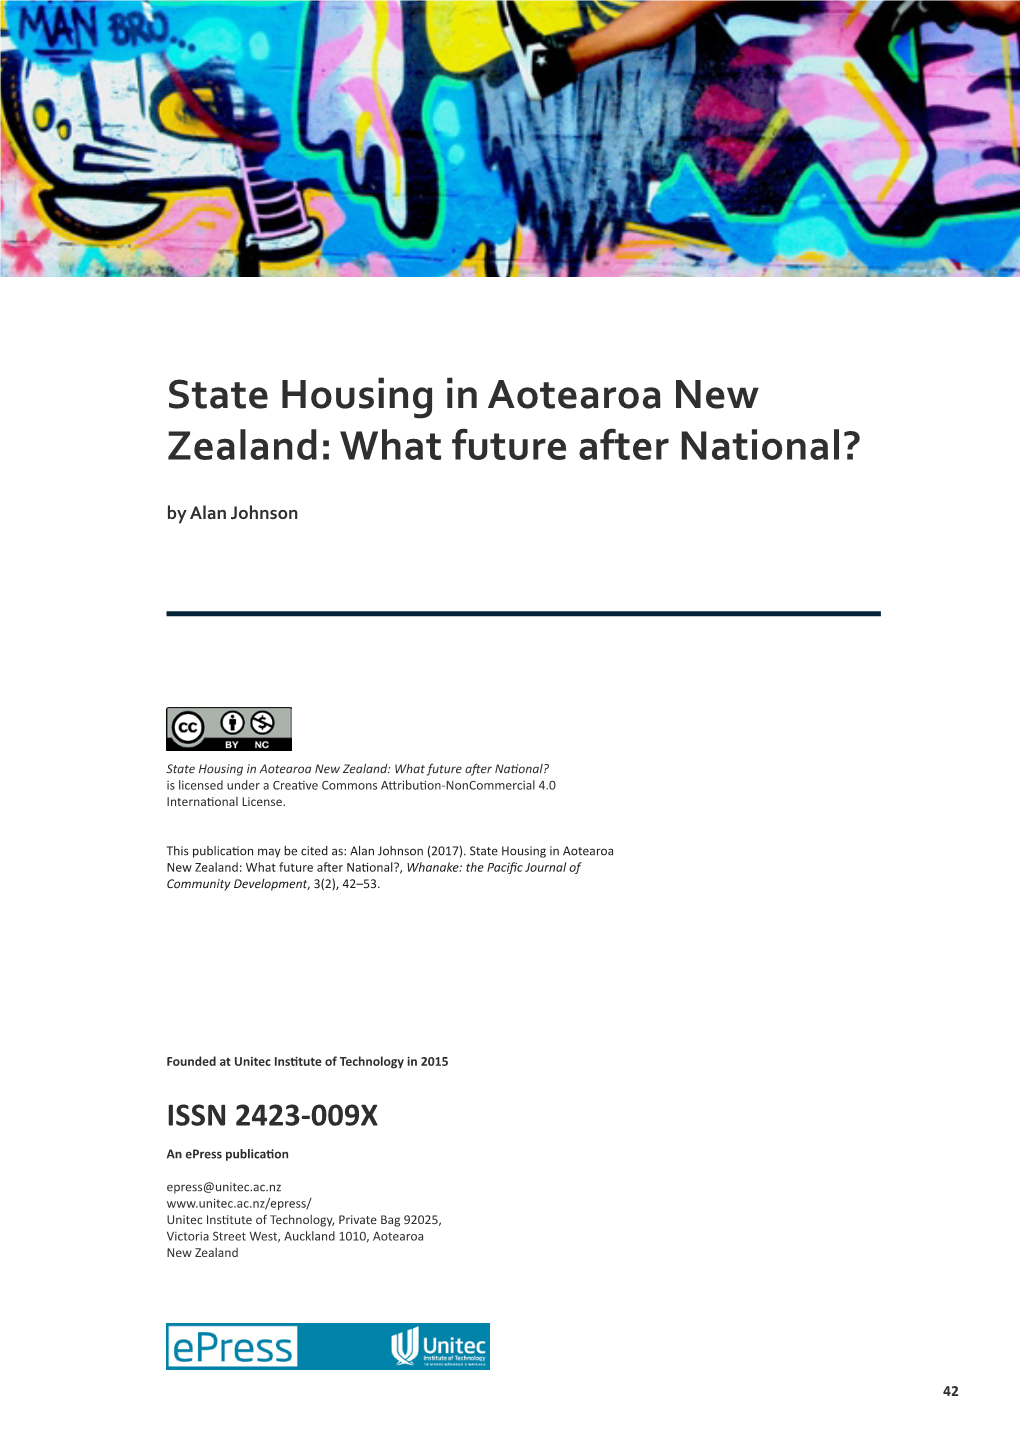 State Housing in Aotearoa New Zealand: What Future After National? by Alan Johnson